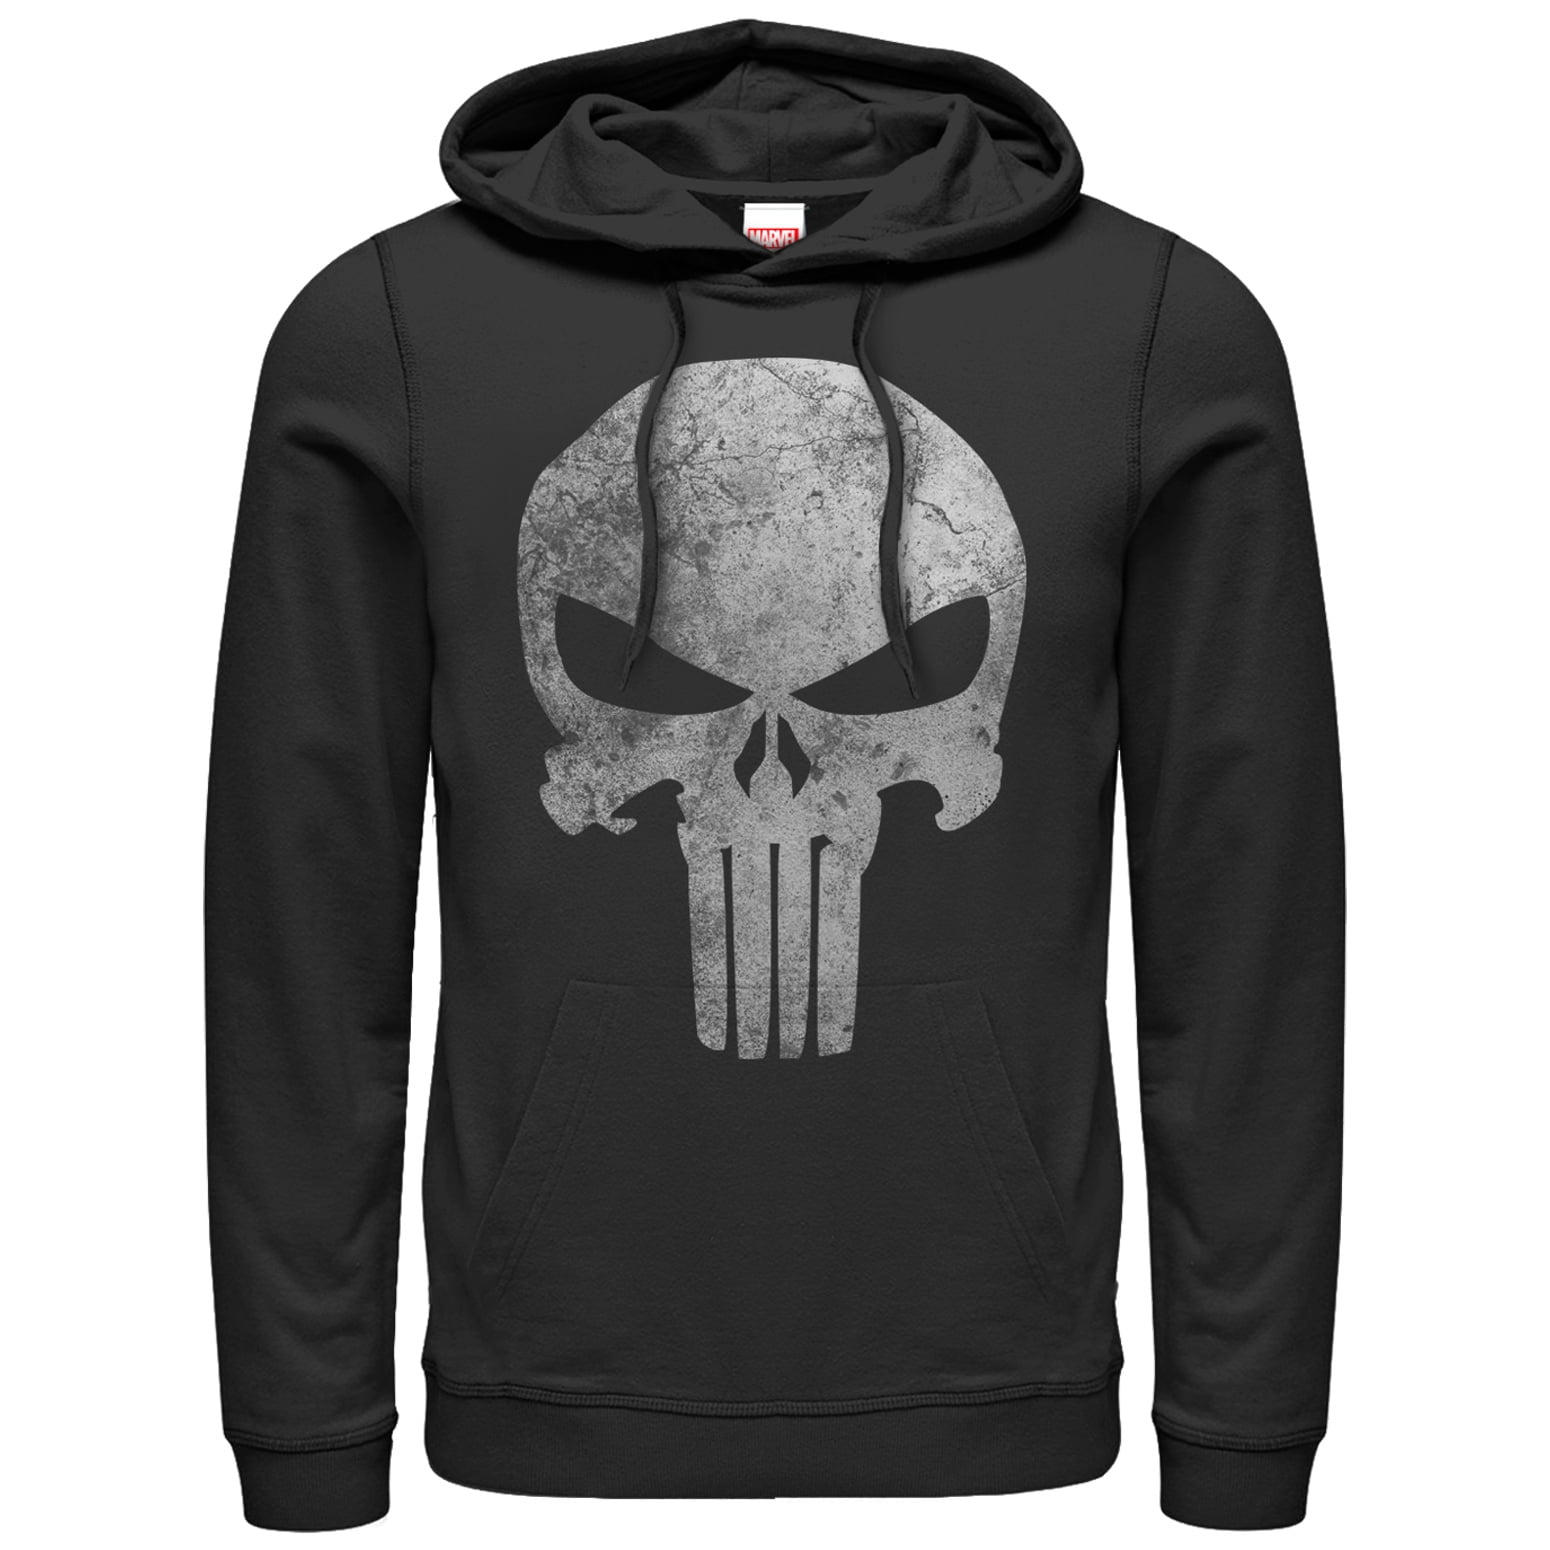 Wild WY Marvel Punisher Hoodie 3D Digital Print Casual Sweater Cosplay Anime Jacket Black-S 